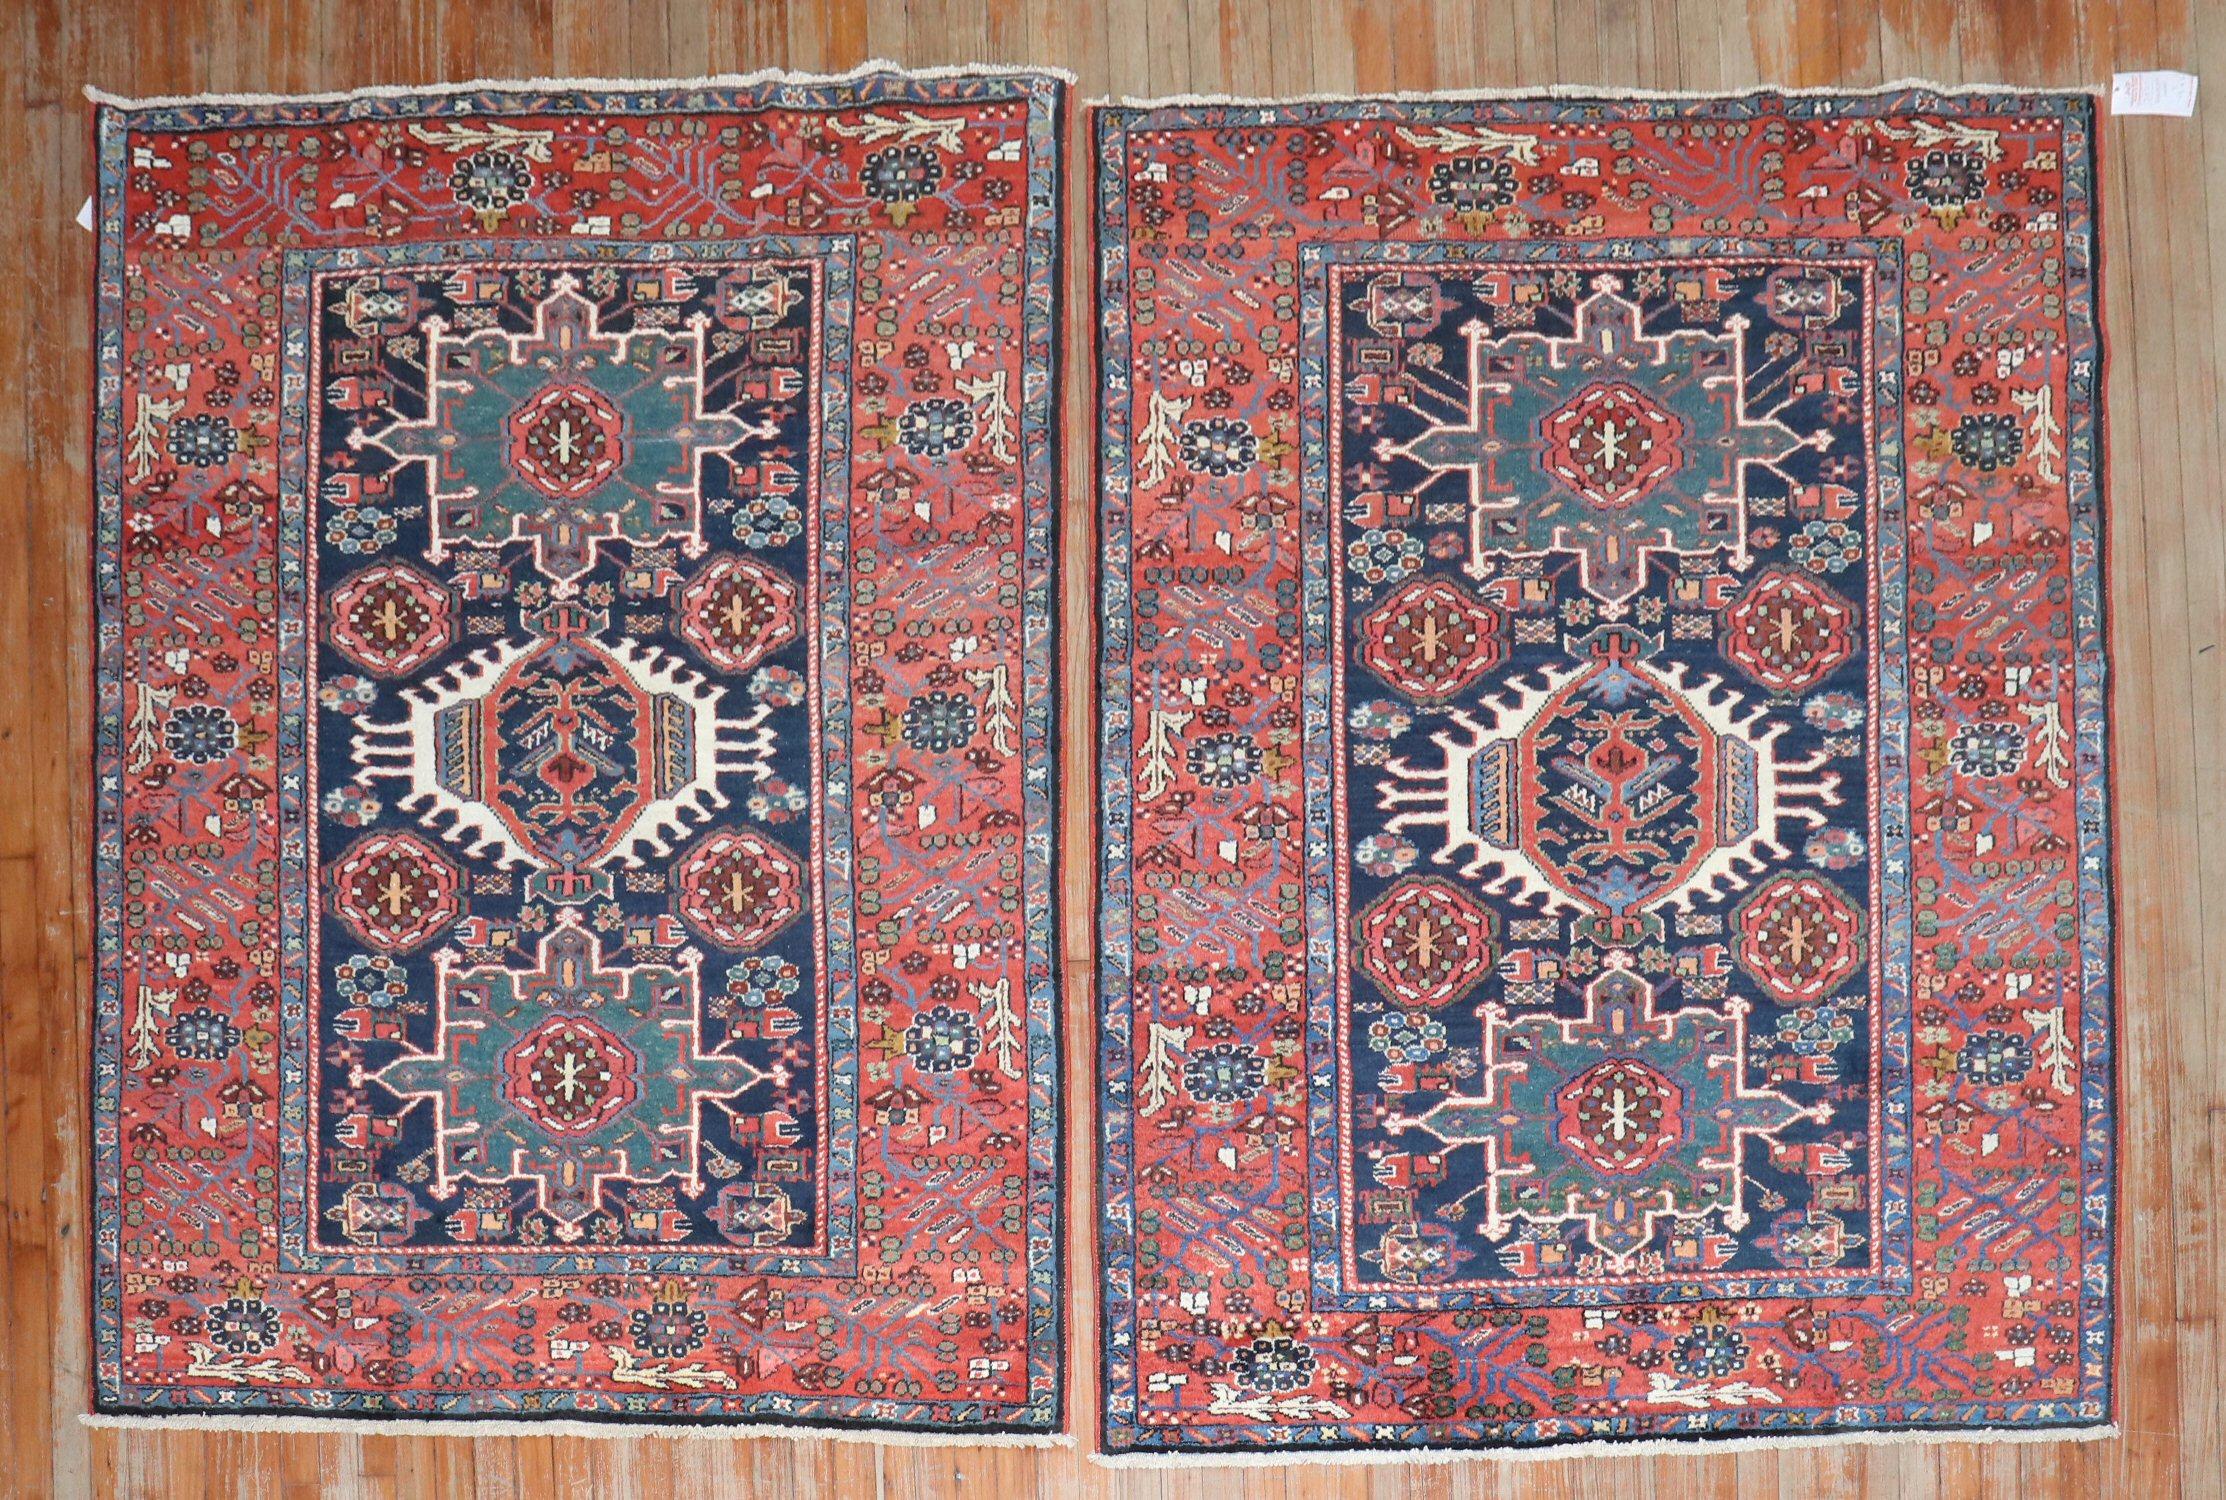 A pair of accent size Navy Field Persian Heriz rugs from the 1st quarter of the 20th century.

Measuring 4'10'' x 6' & 4'9'' x 6'1'' respectively.